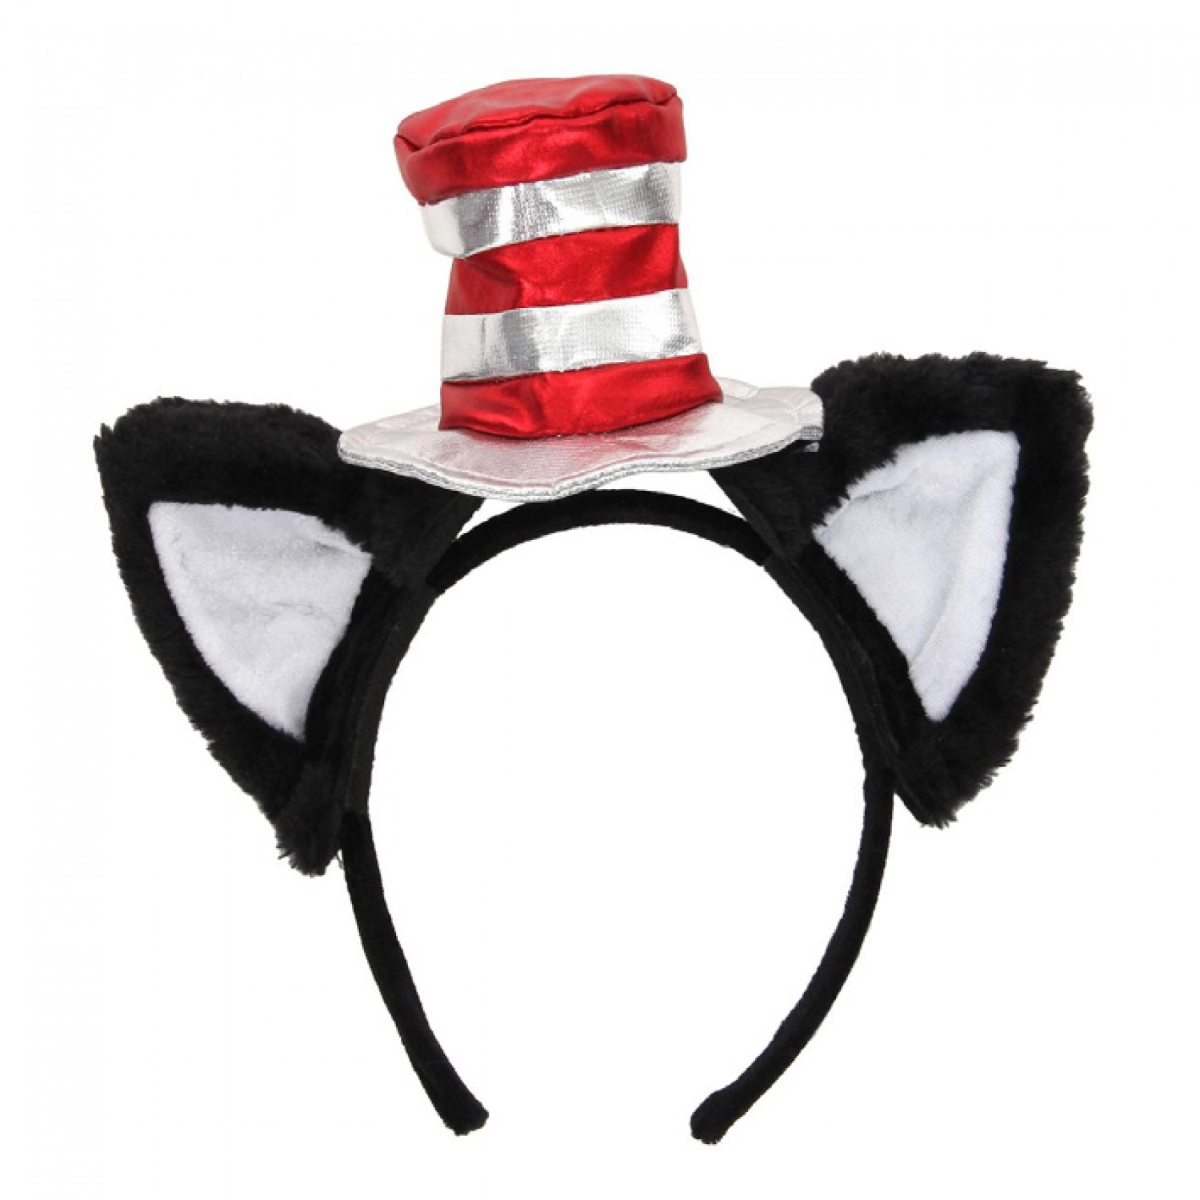 Dr. Seuss 849426 Dr. Seuss the Cat In the Hat Deluxe Headband